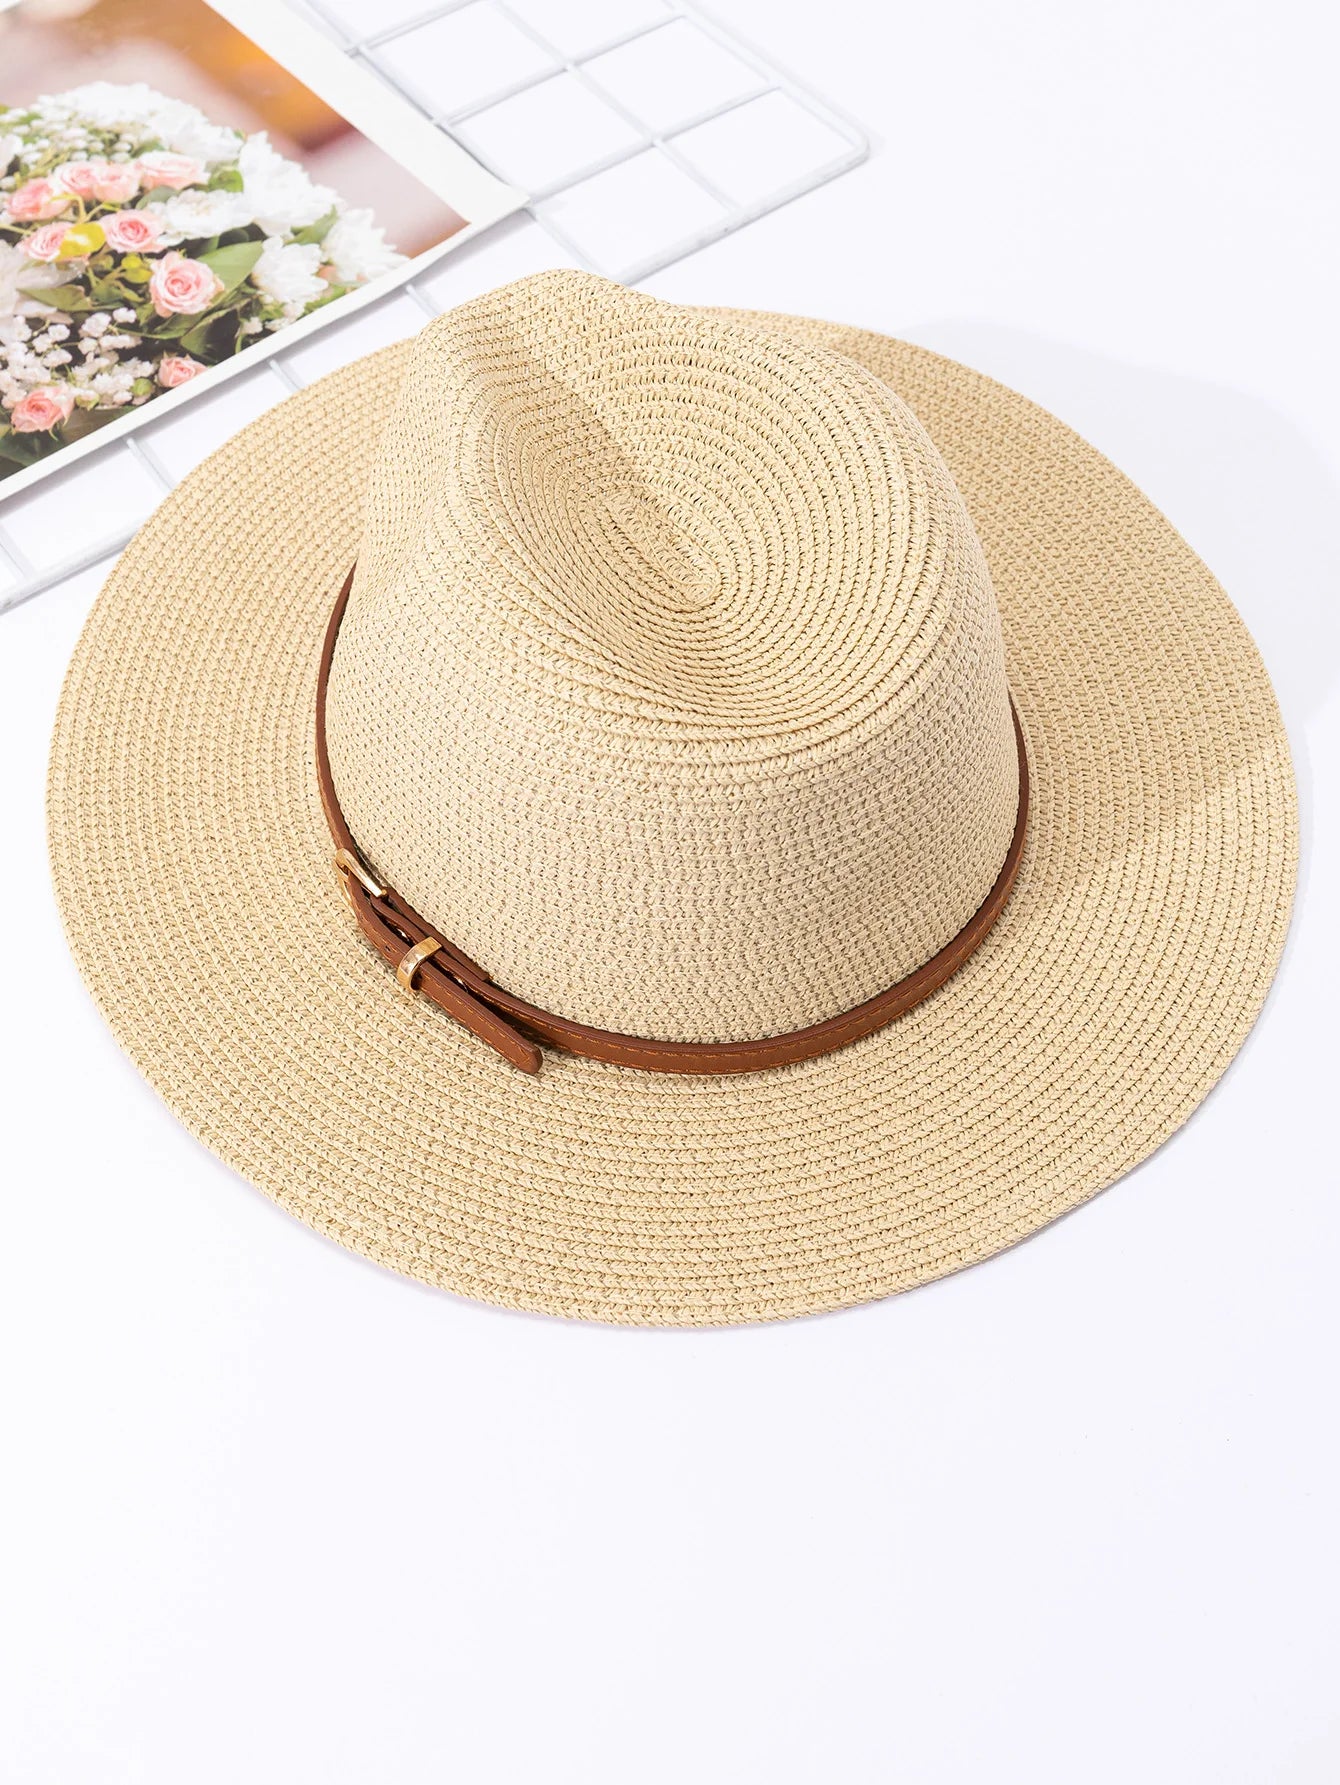 Panama Straw Hat,  Jazz Top Hat, For Men & Women Straw Woven Fashionable Sun Protection